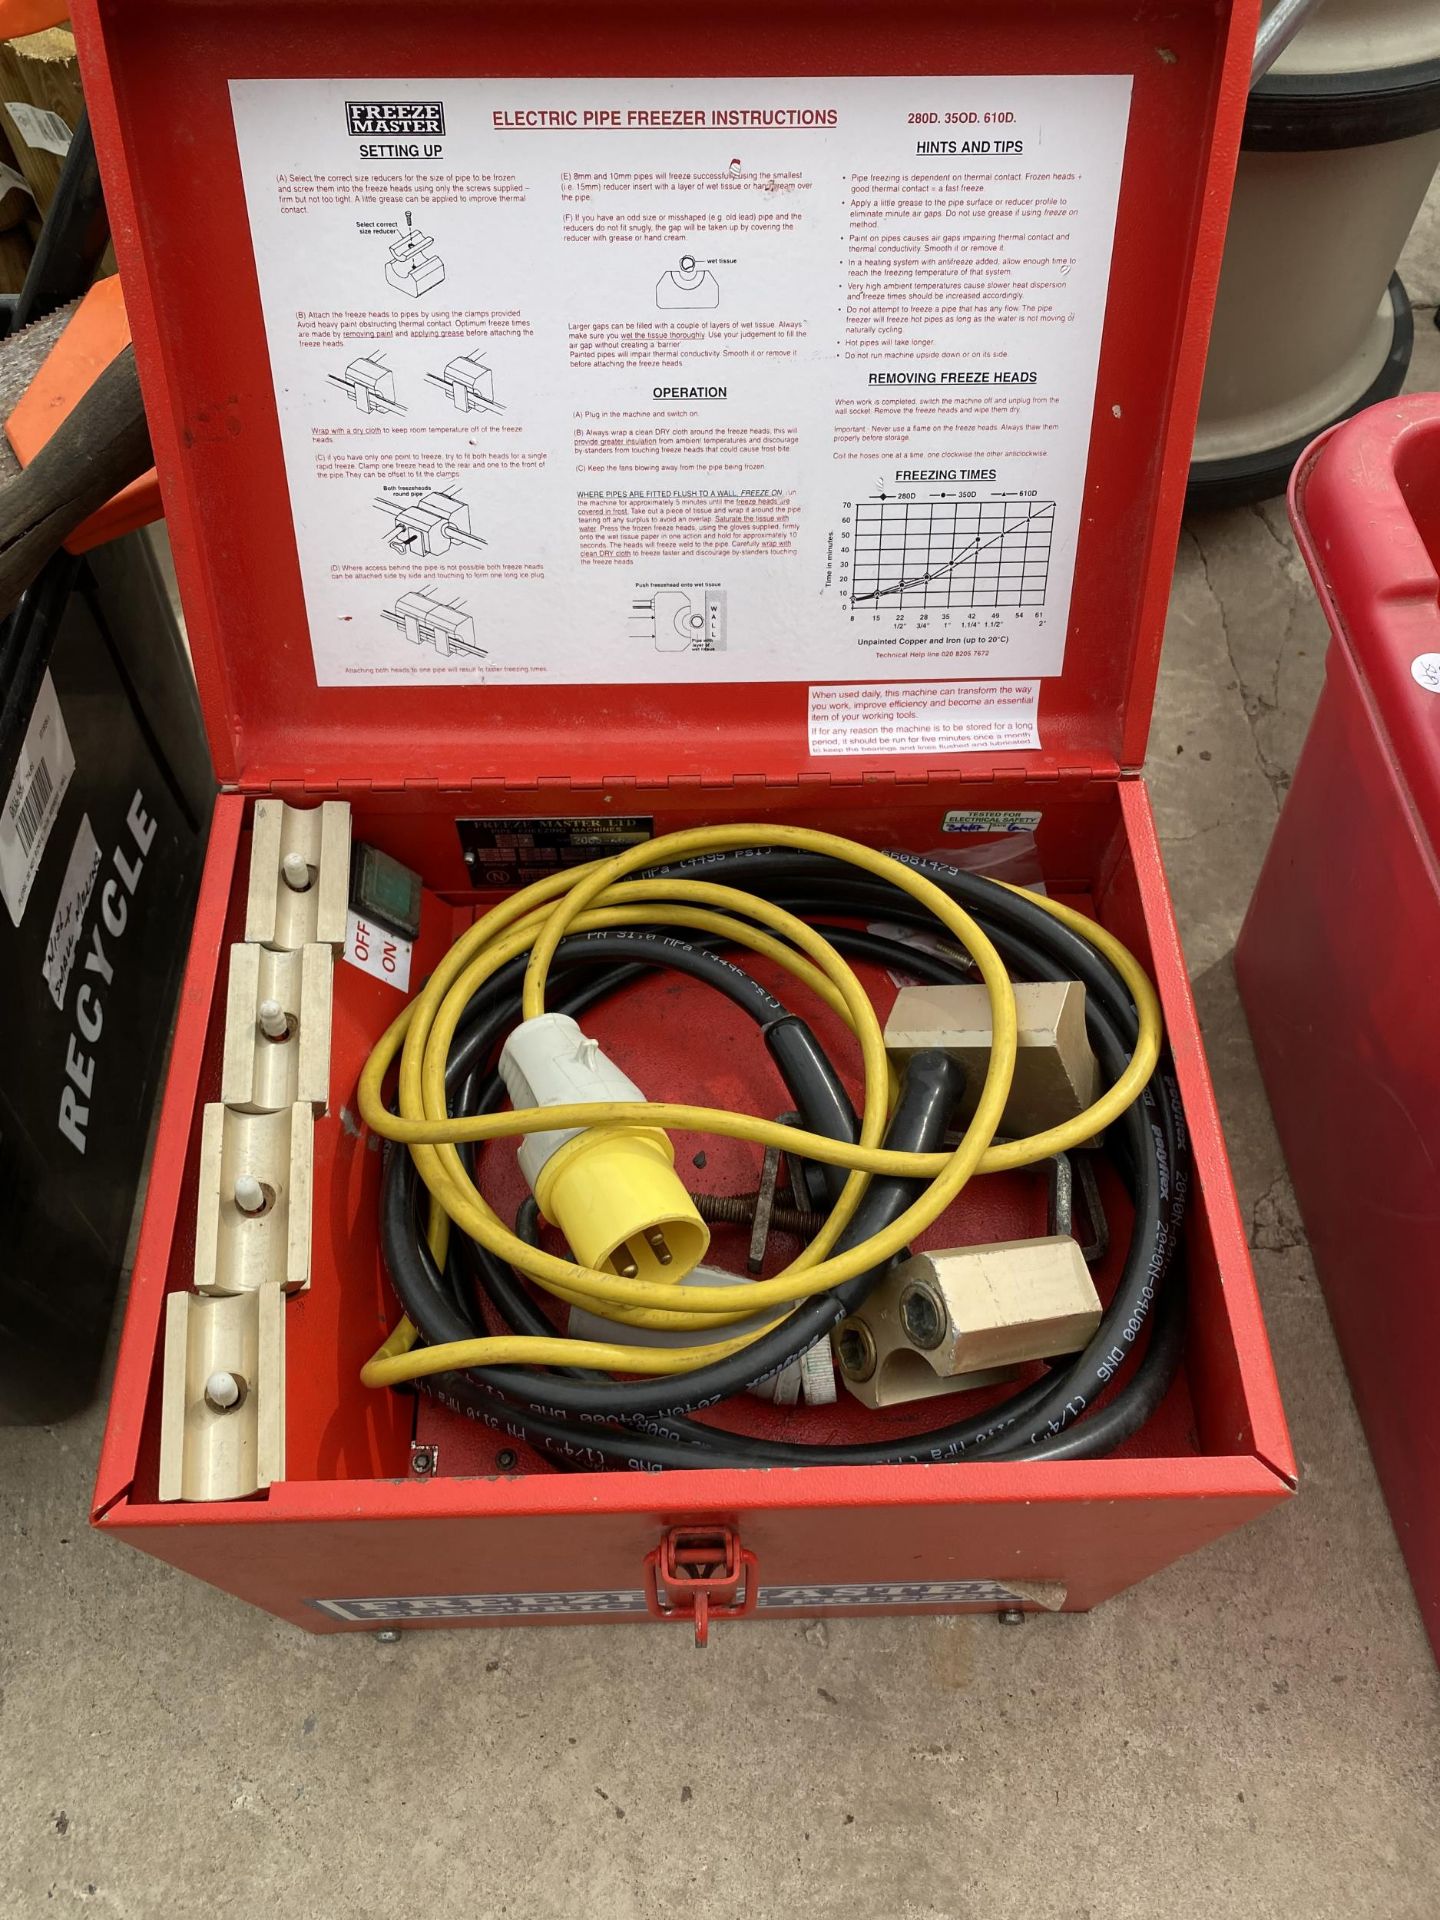 A CASED ELECTRIC PIPE FREEZER KIT - Image 2 of 4